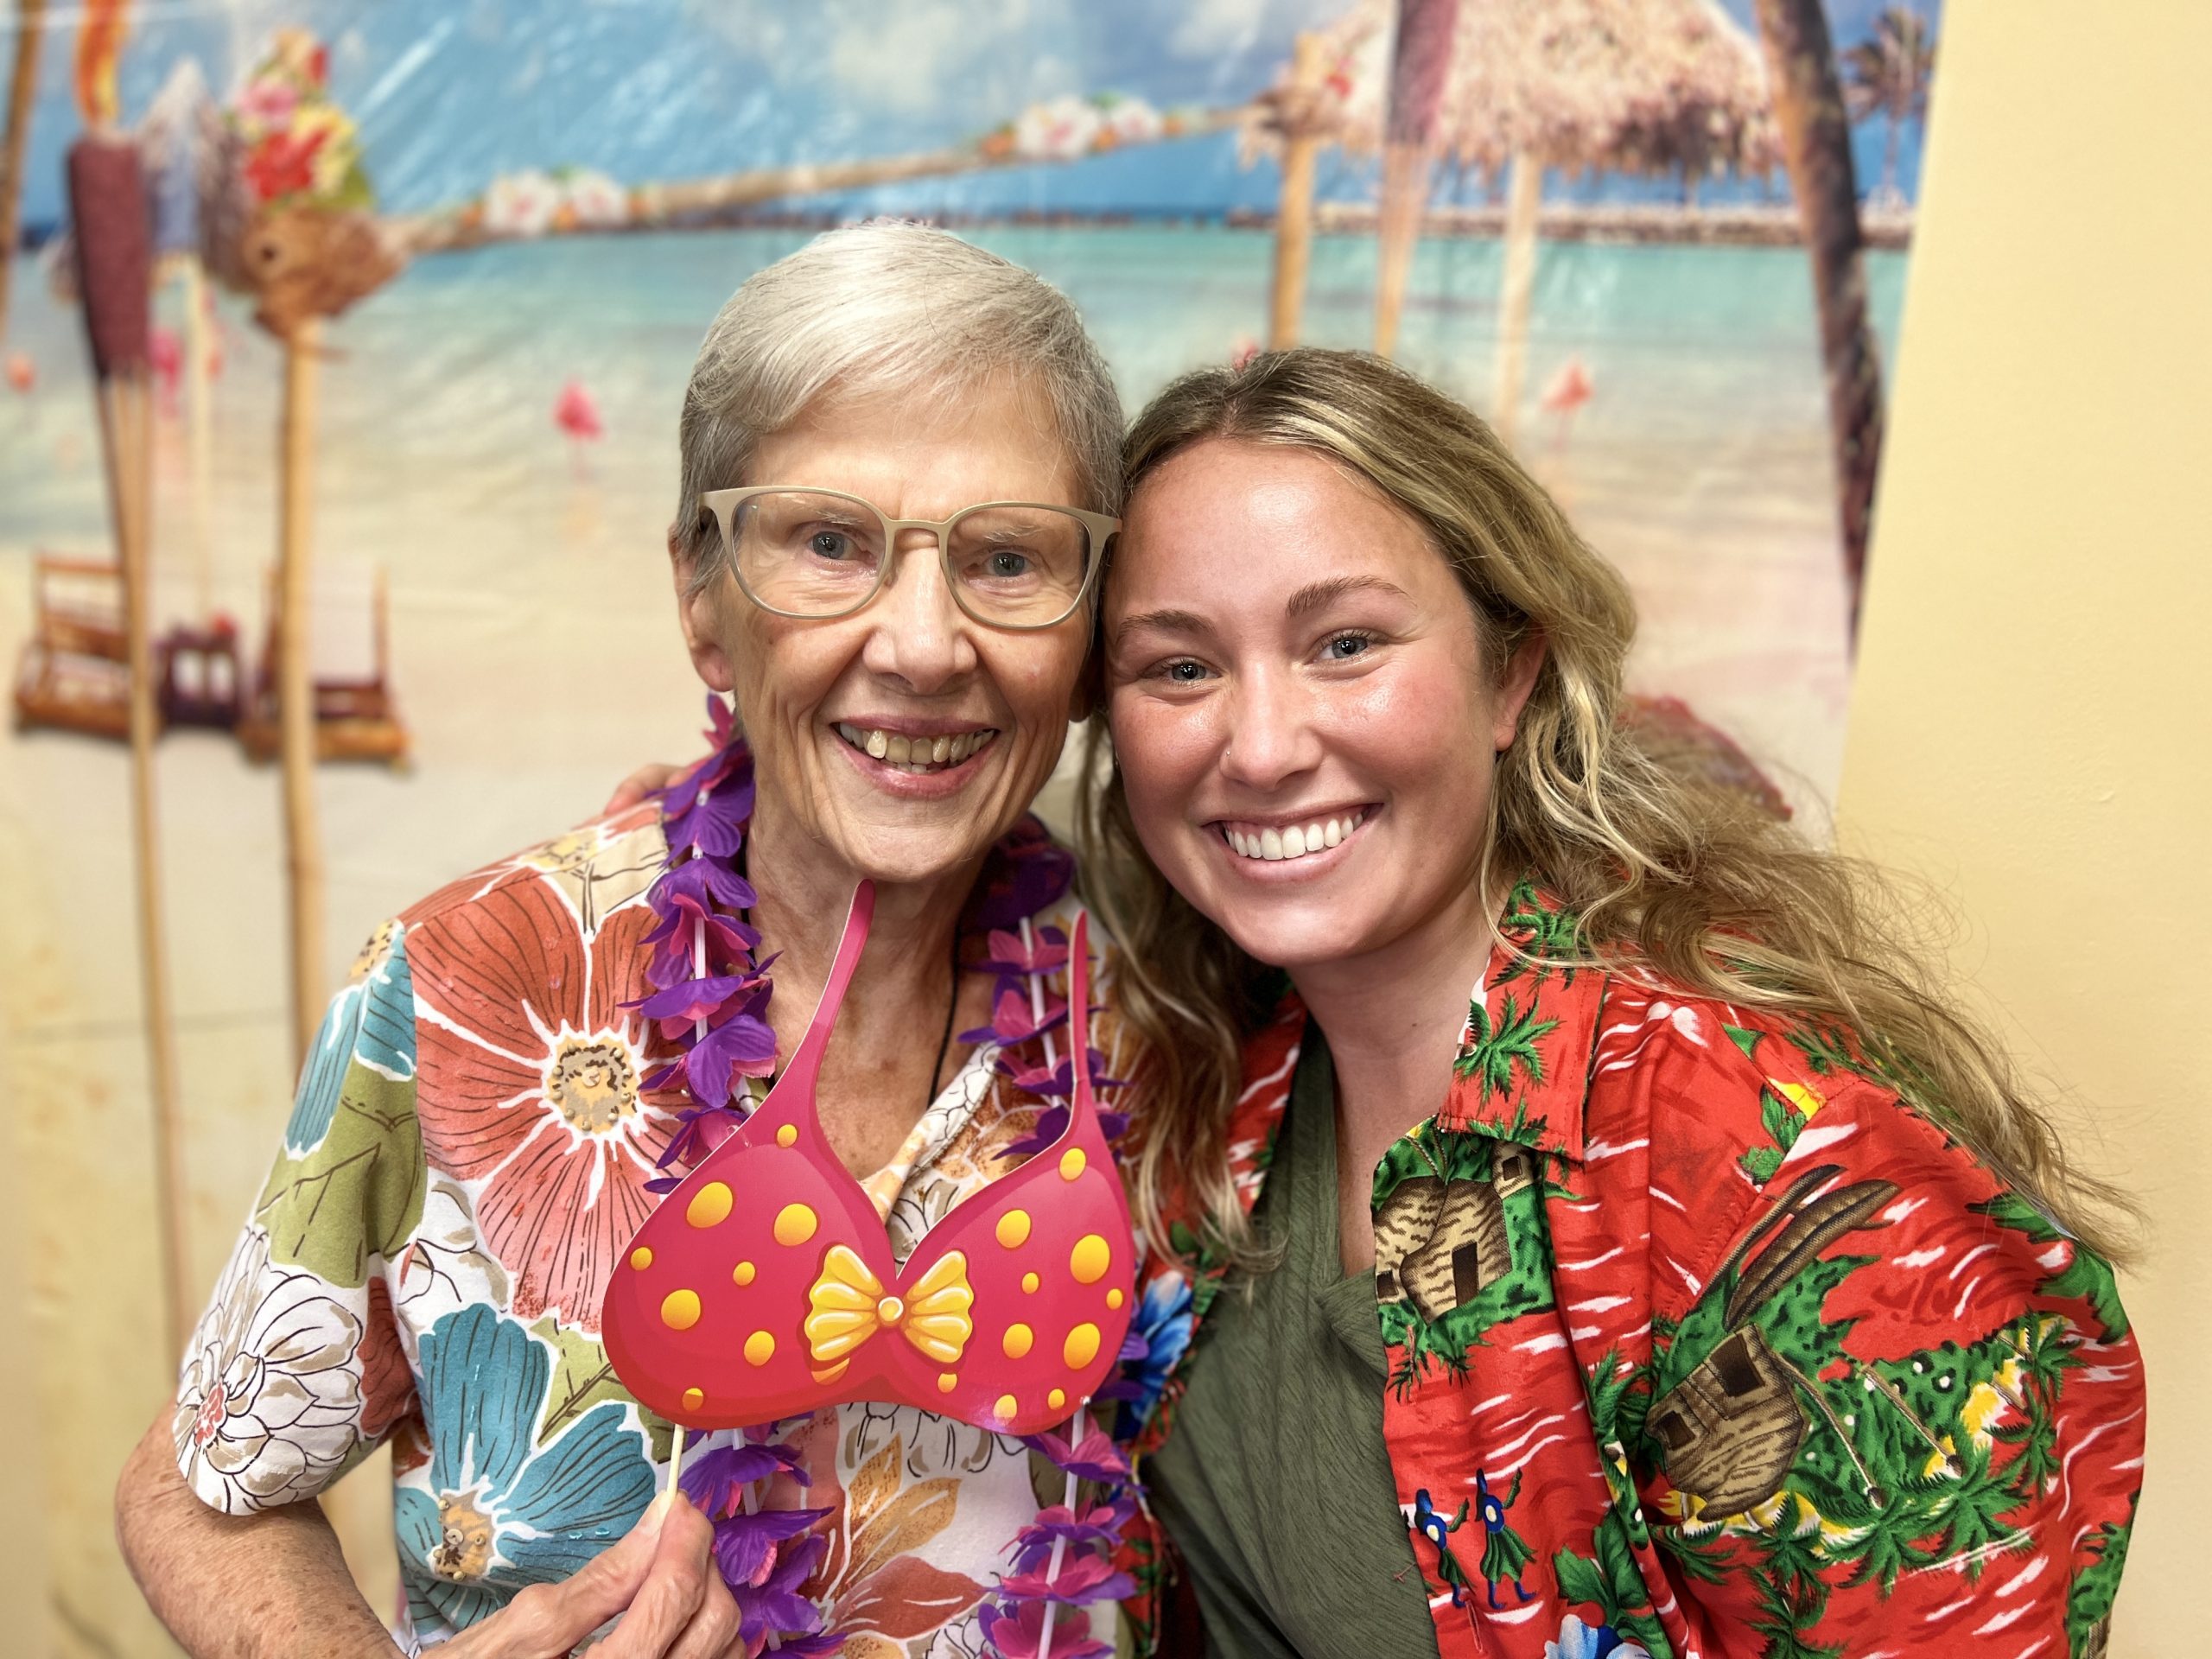 Independent Living resident and a staff member at Abe's Garden Community pose in Hawaiian shirts at a party